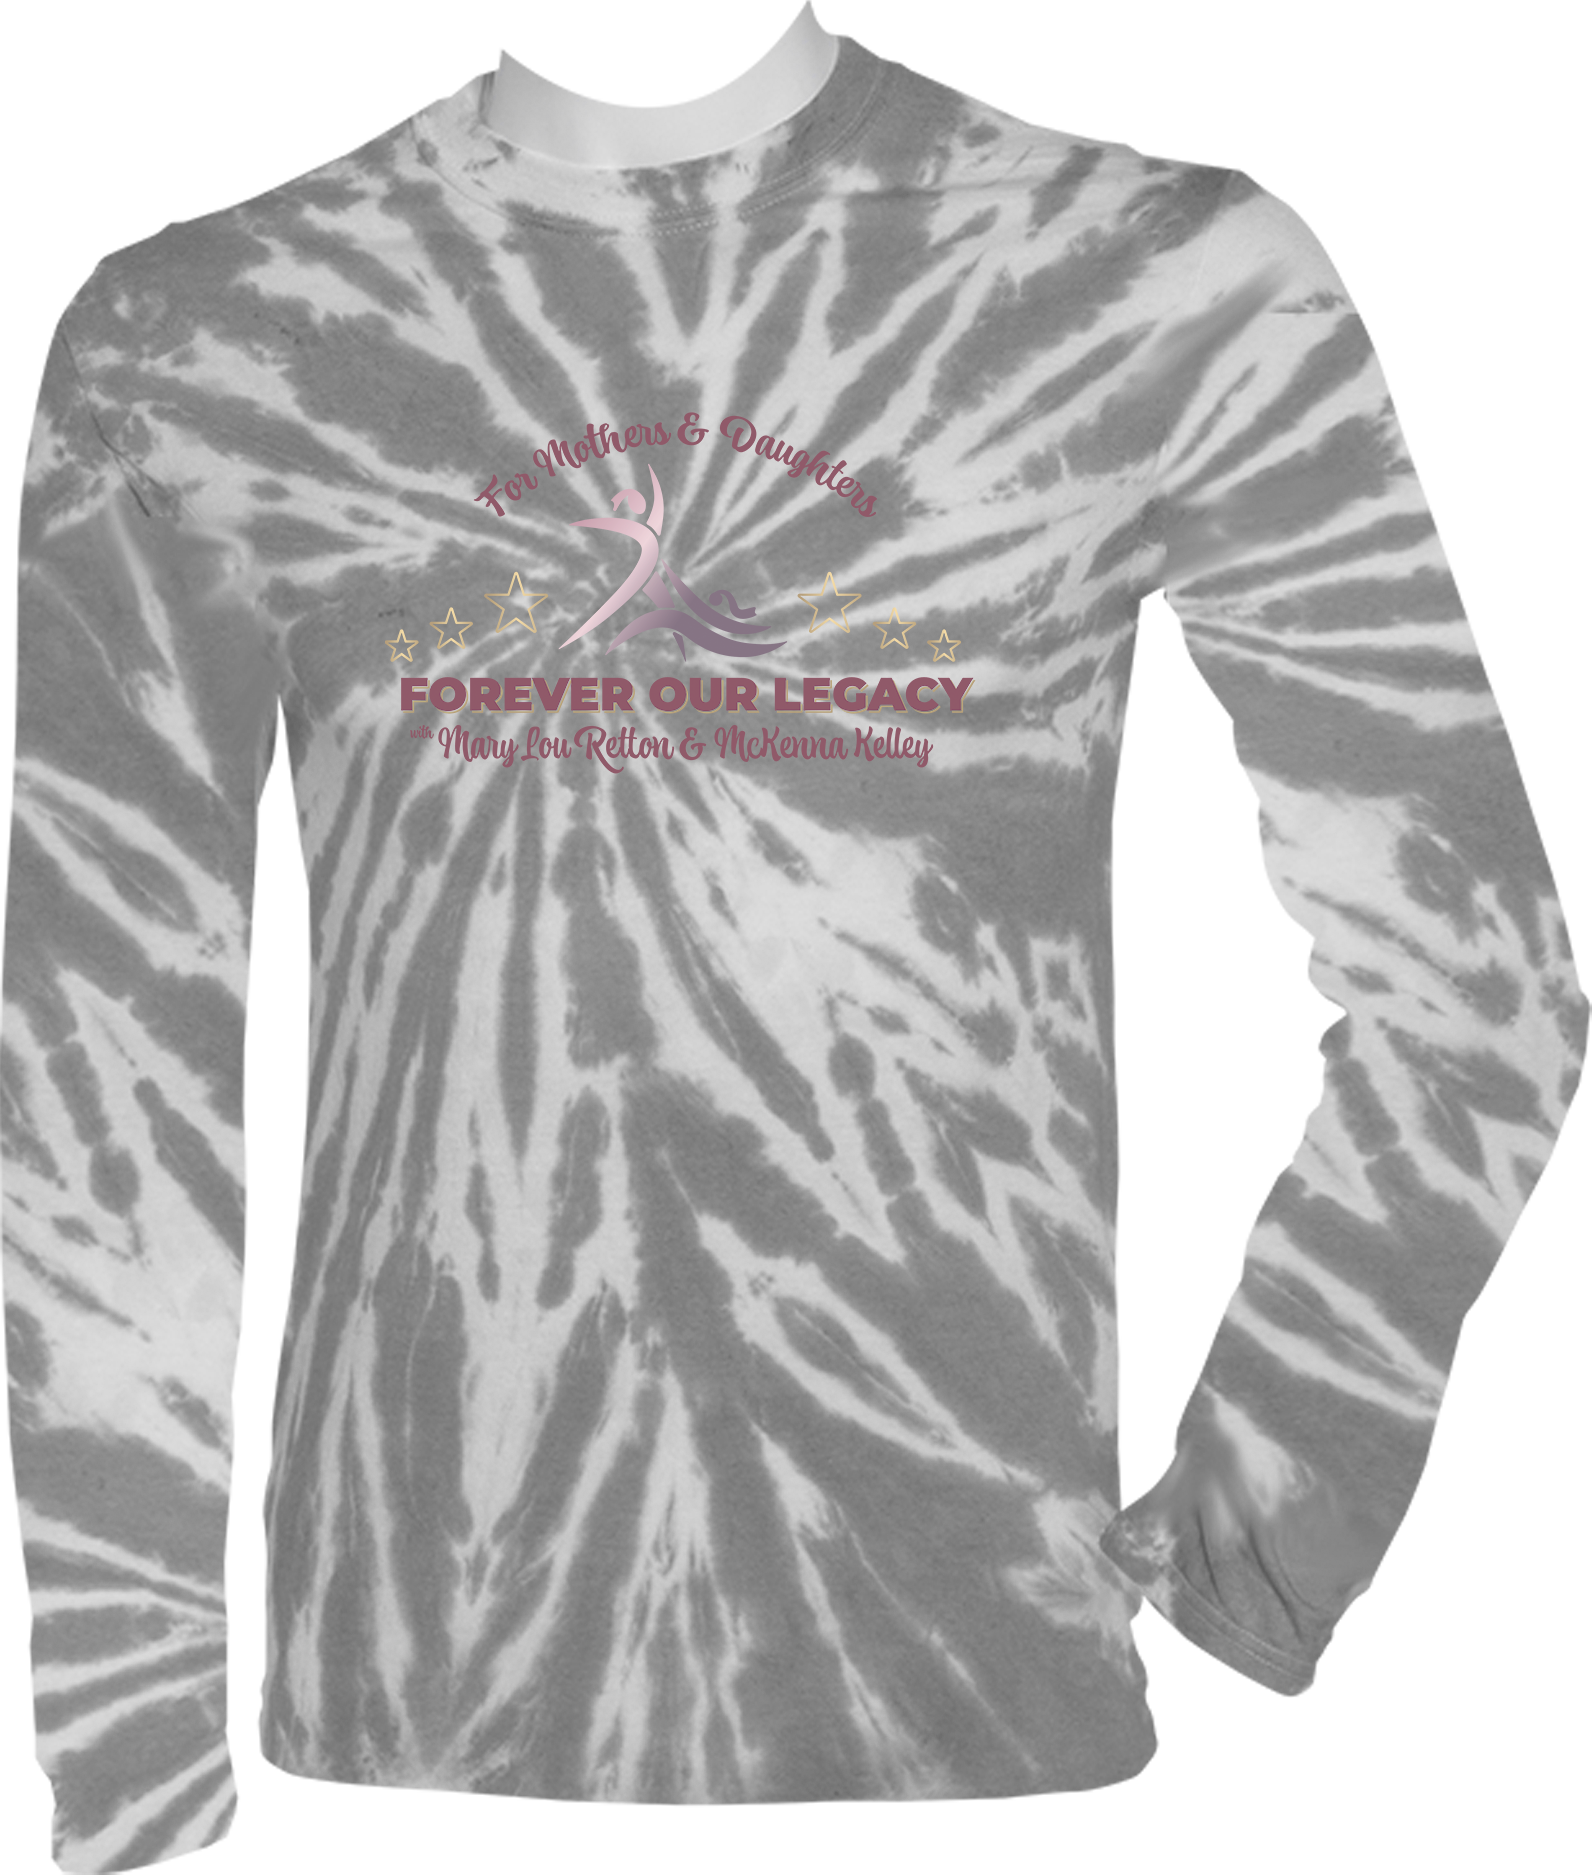 TIE-DYE LONG SLEEVES - 2023 For Mothers & Daughters Forever Our Legacy with Mary Lou Retton and Mckenna Kelley